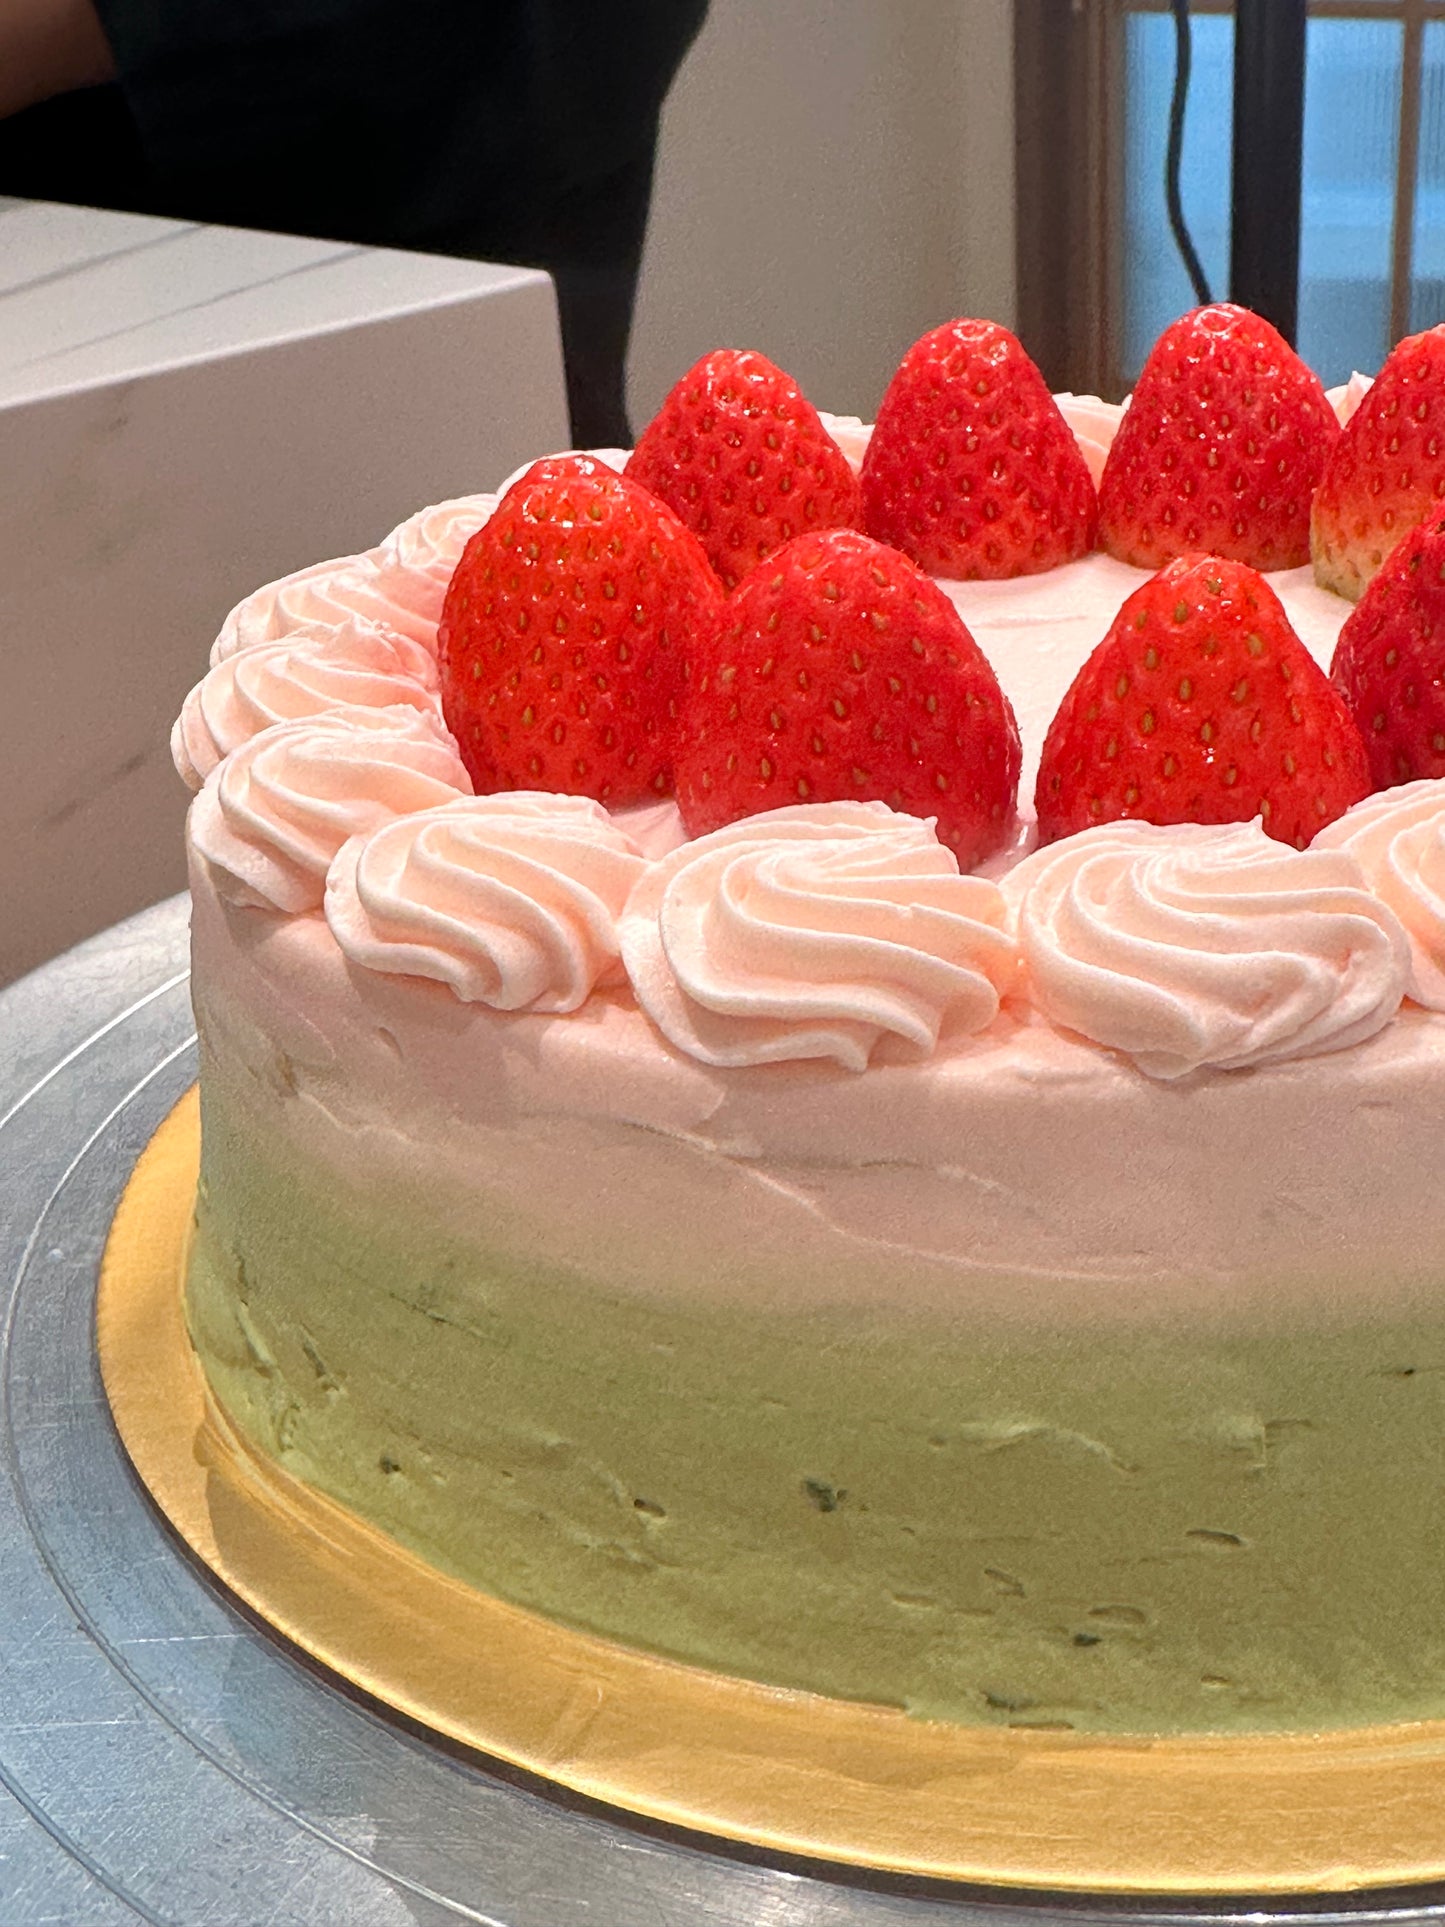 Strawberry matcha crepe cake 6" 🍓suitable for 6-8 pax